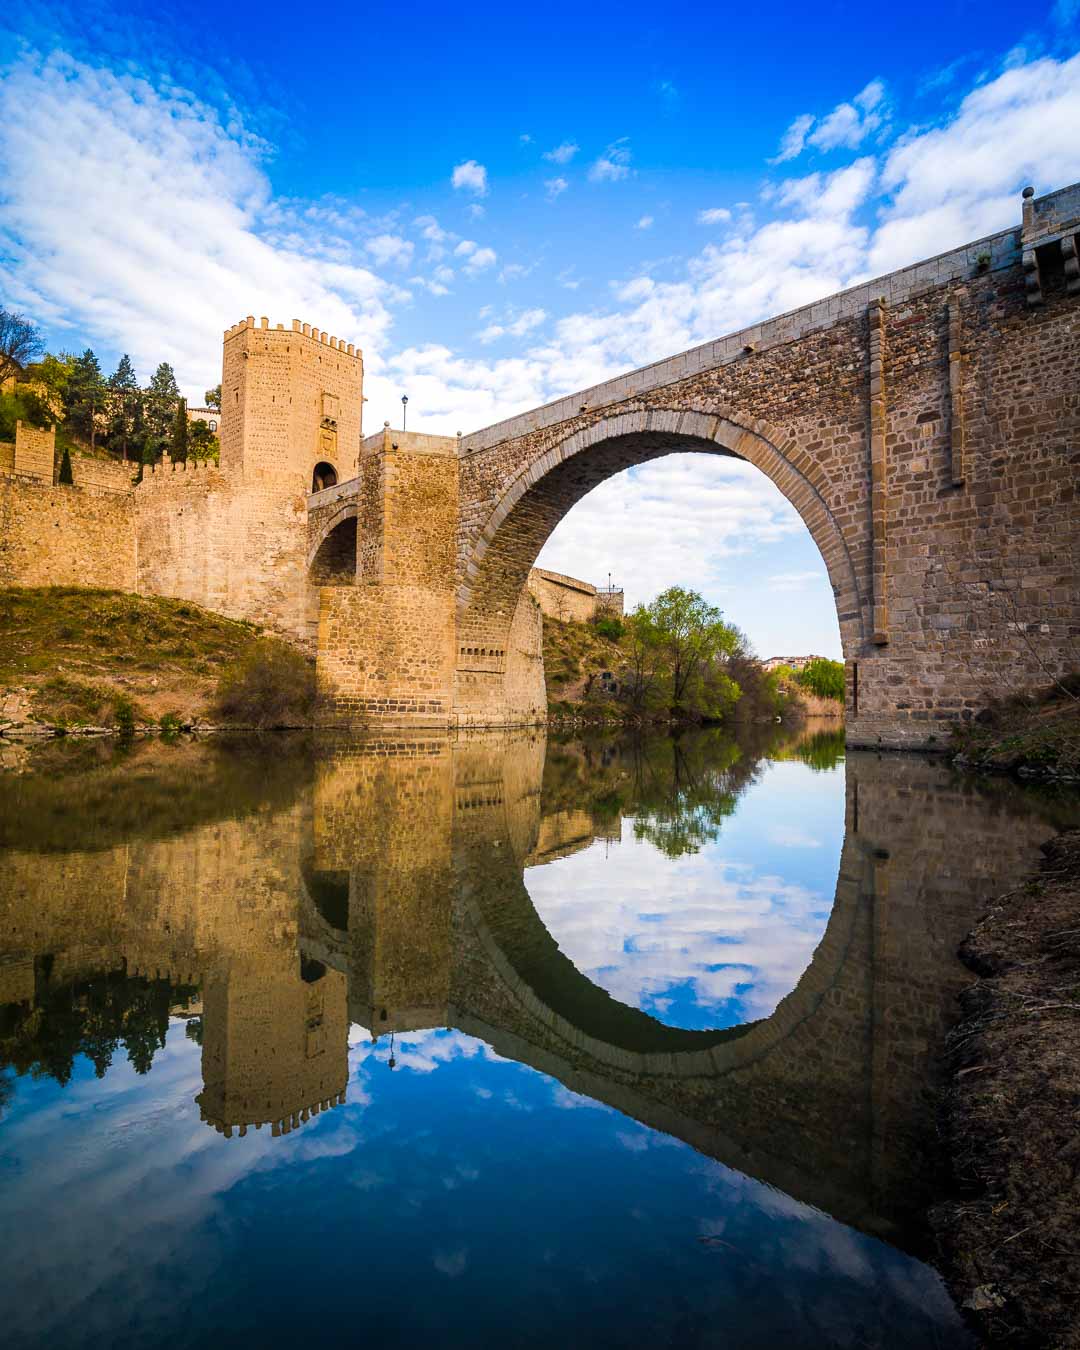 walking over the puente de alcantara is one of the cool things to do toledo spain